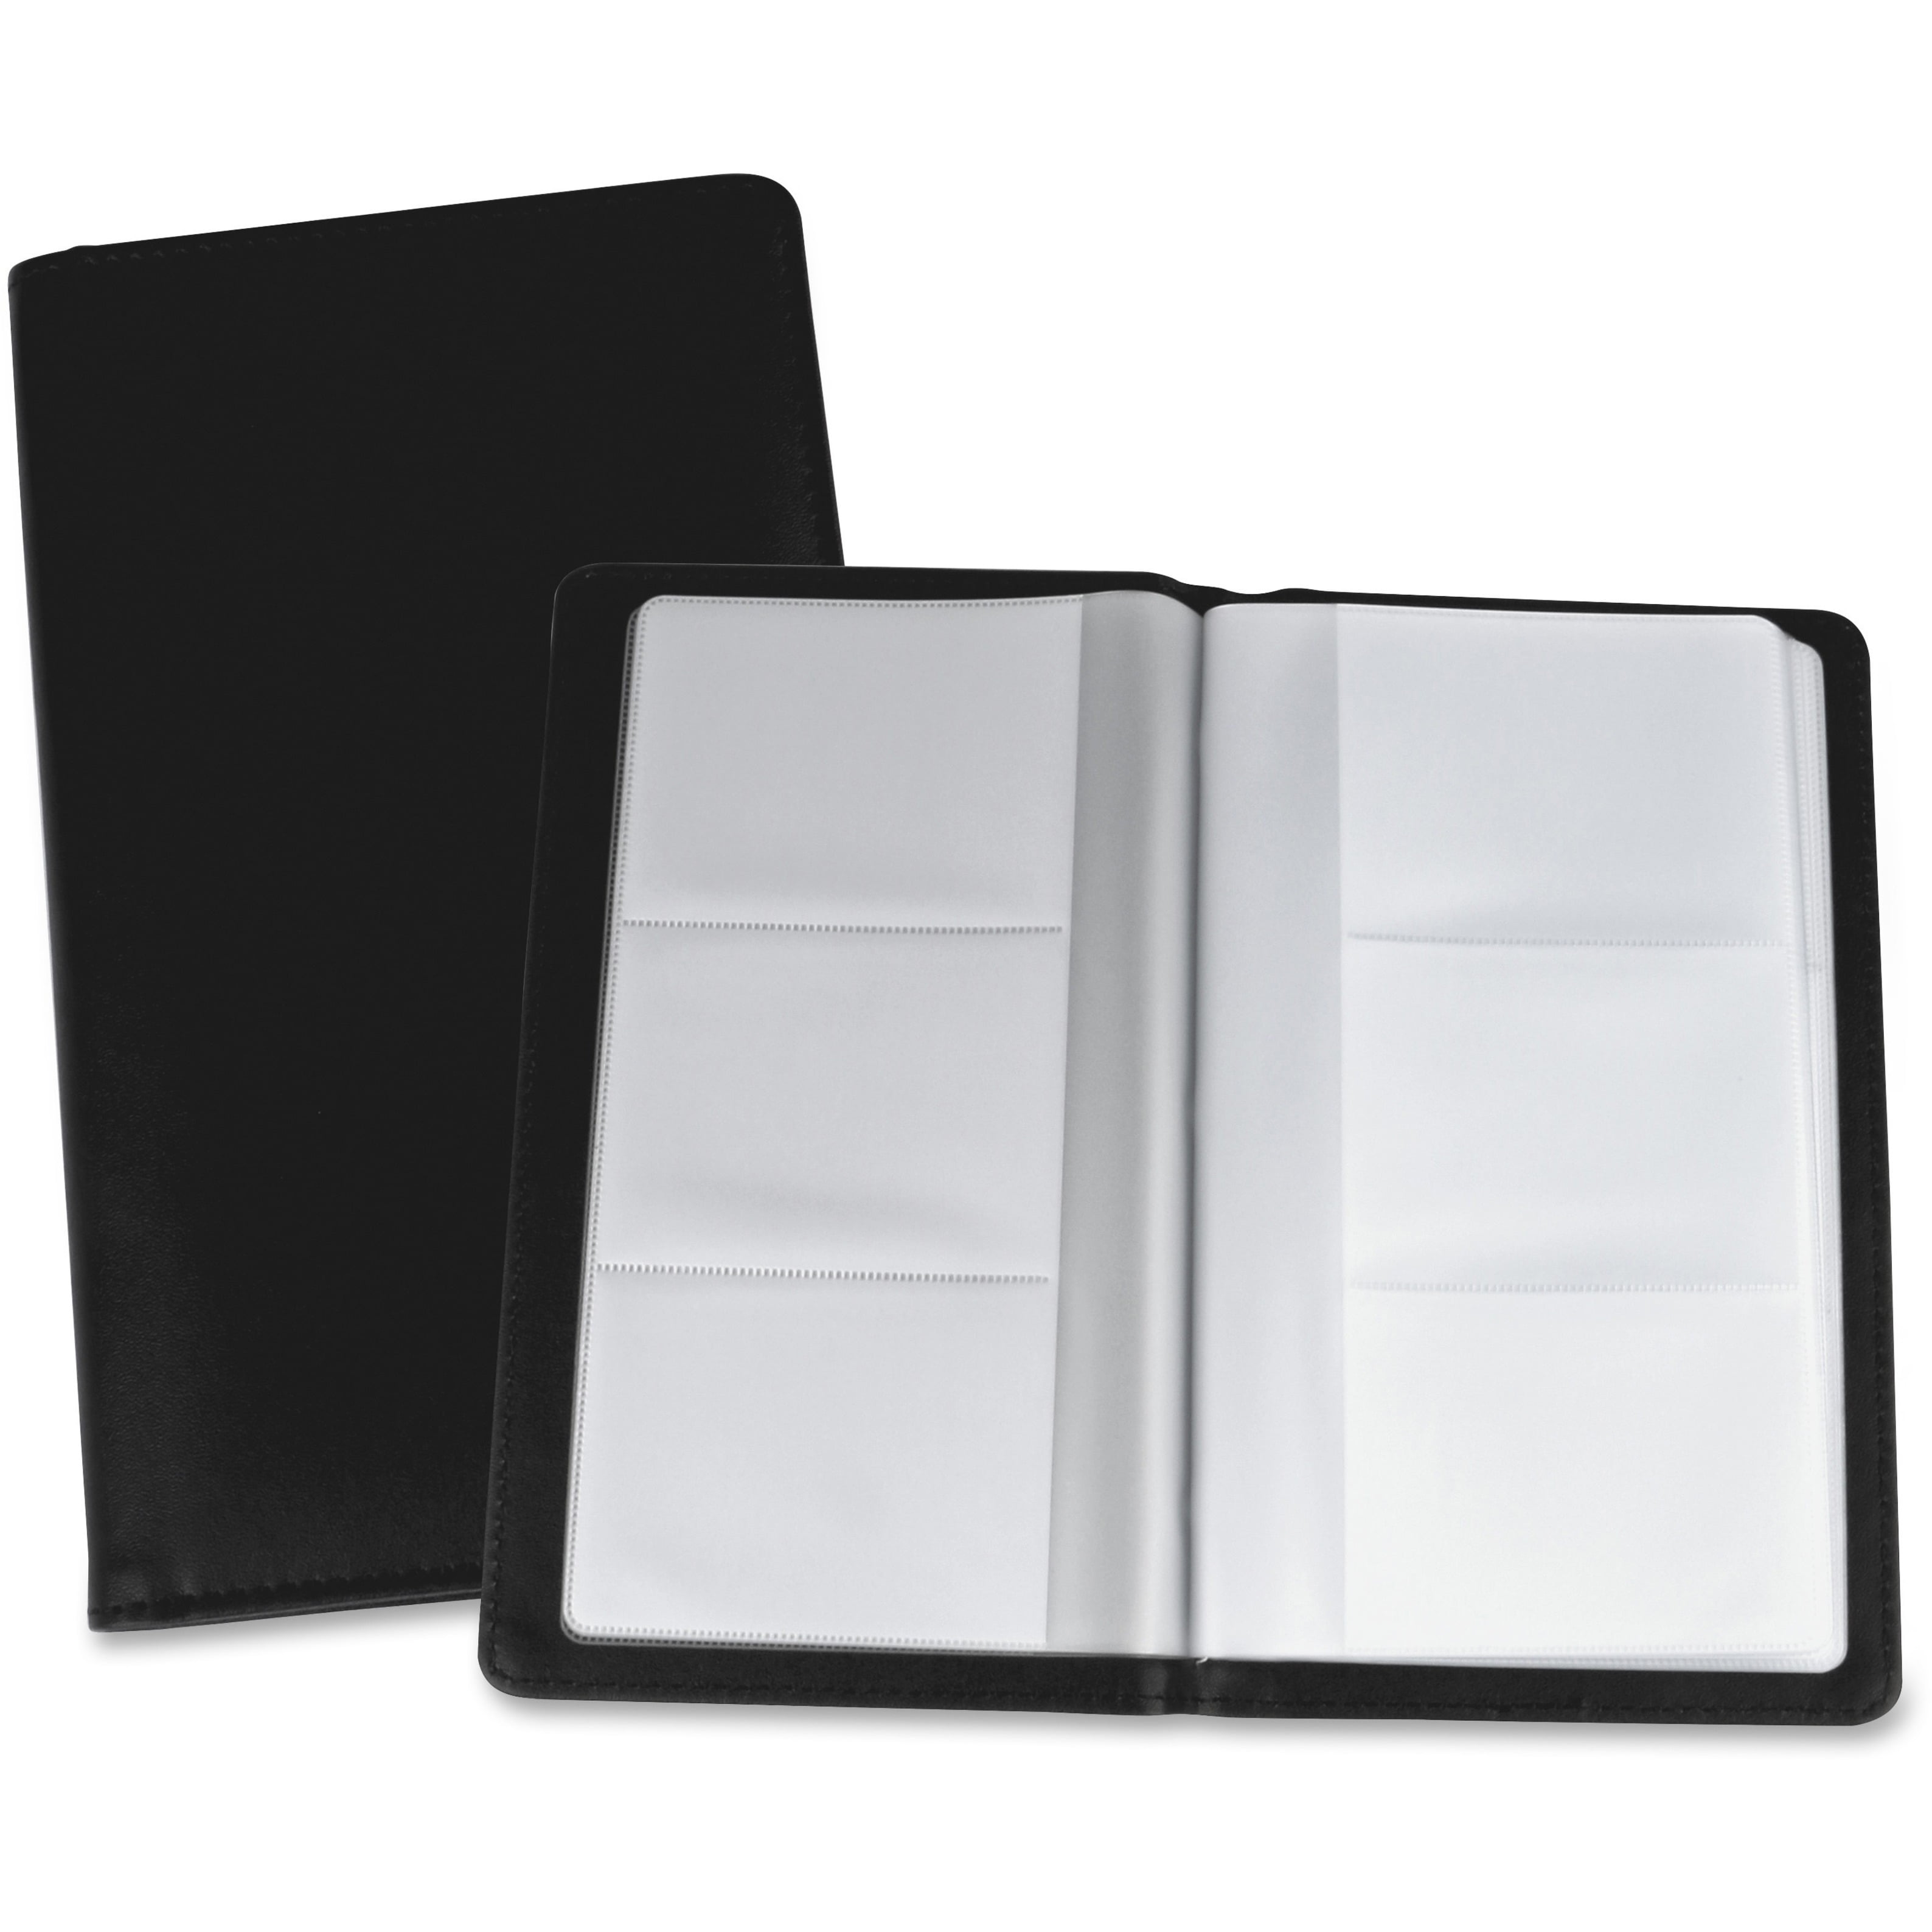 48 Pocket Business Card Holder Black Acrylic Wall Mount Gift Cards Organizer